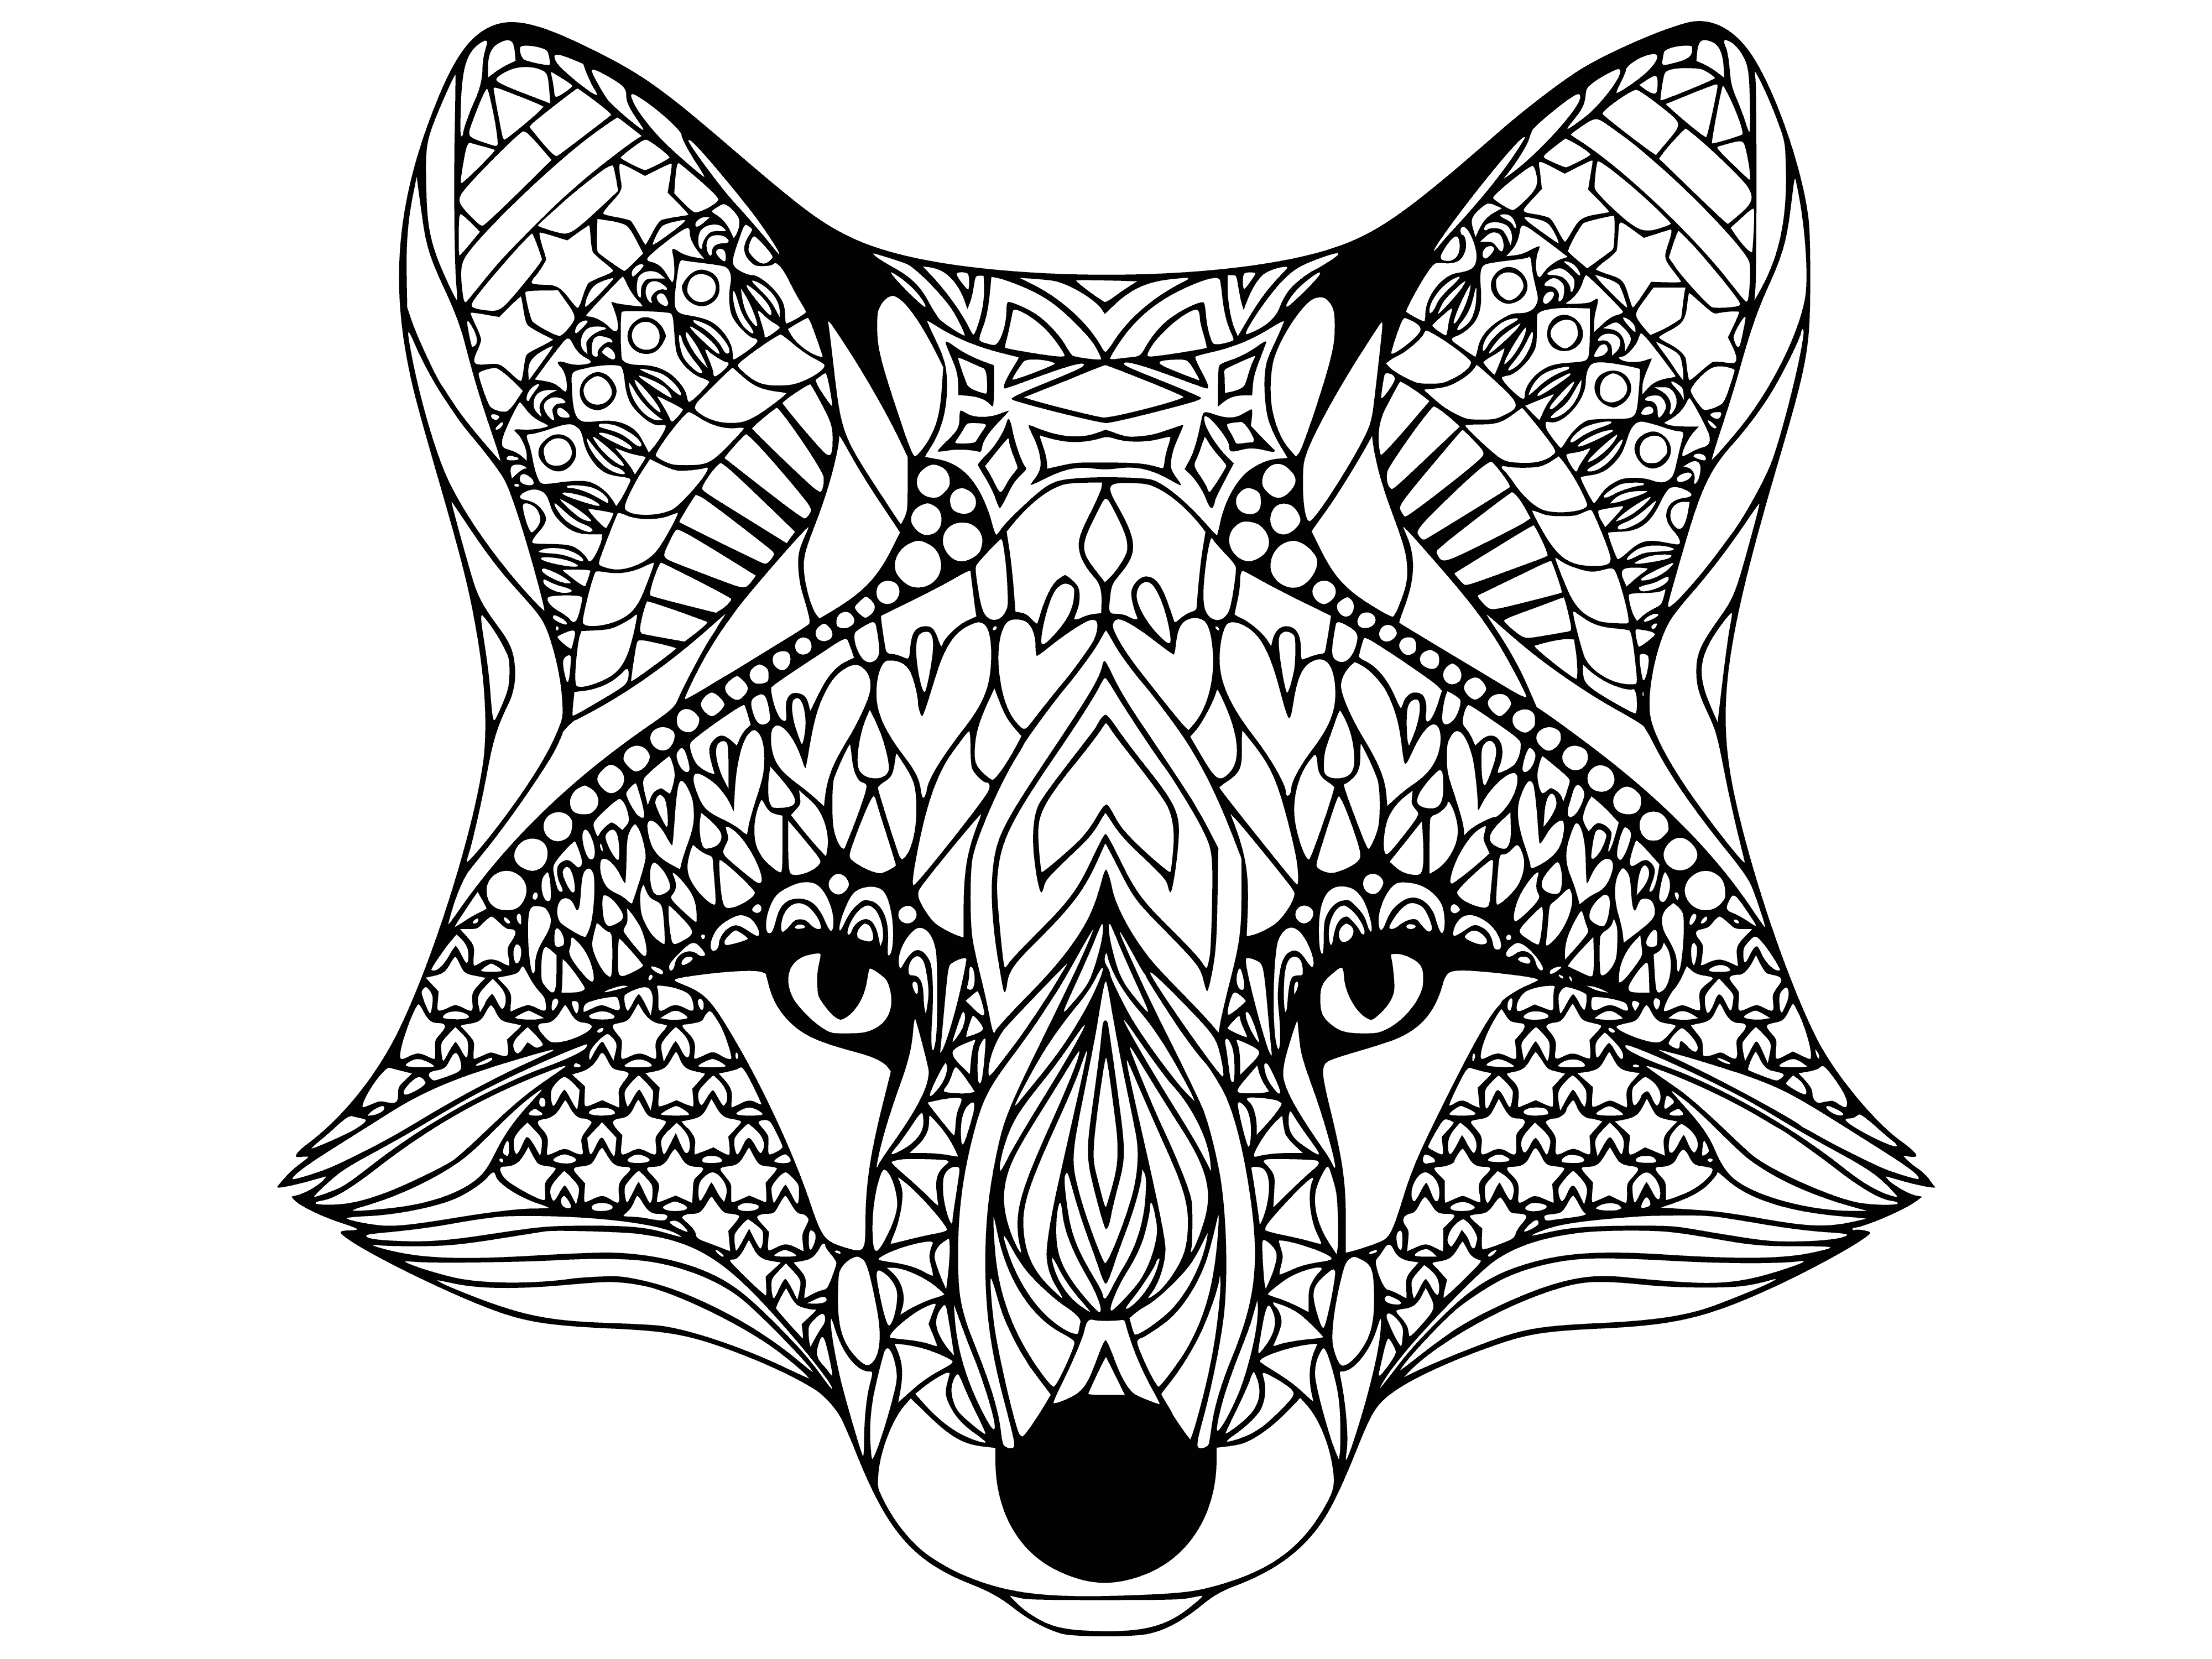 coloring page: Two red foxes; one standing and one sitting. Standing fox has open mouth.